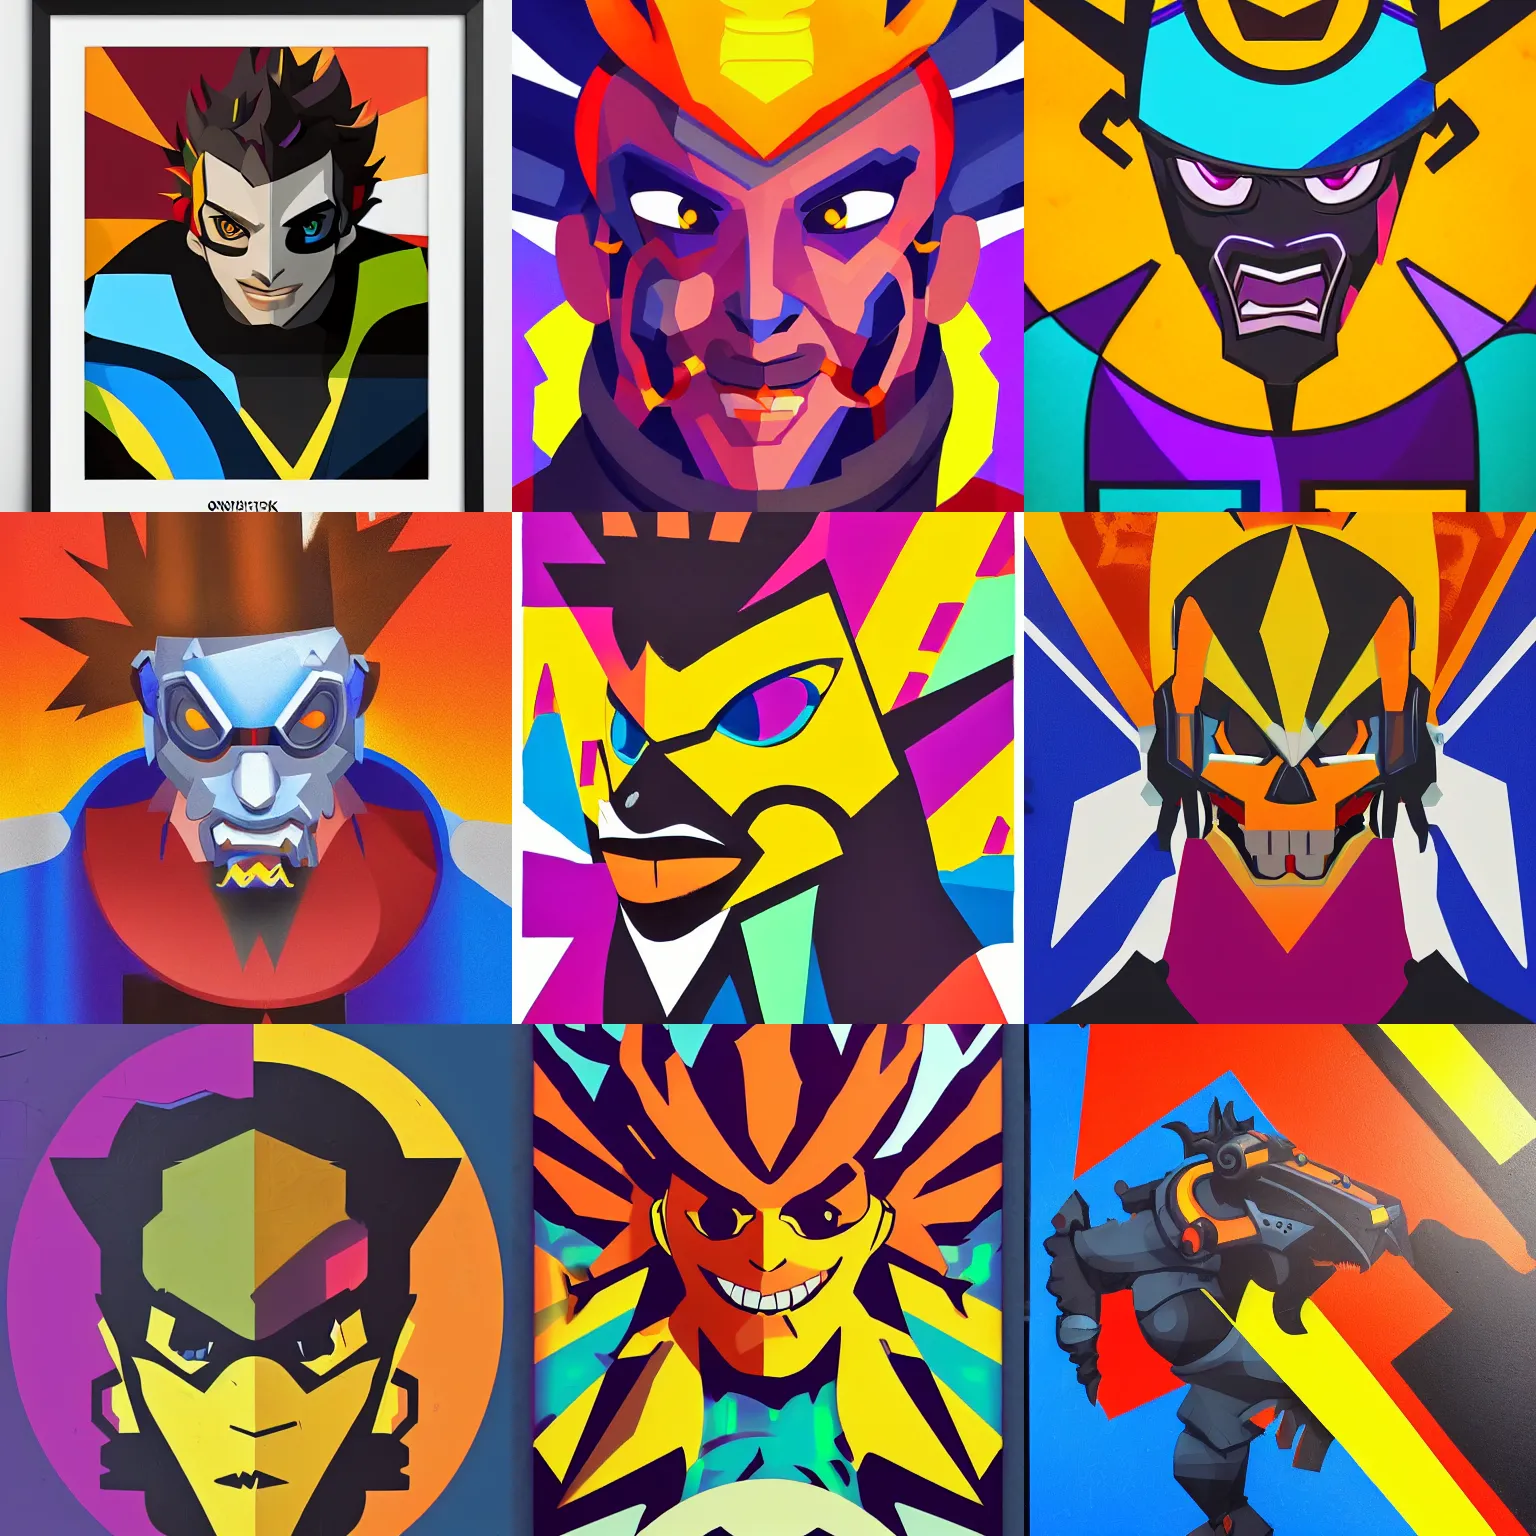 Prompt: Overwatch, a portrait of Junkrat, geometric shapes, vibrant colors, spray paint, rounded corners